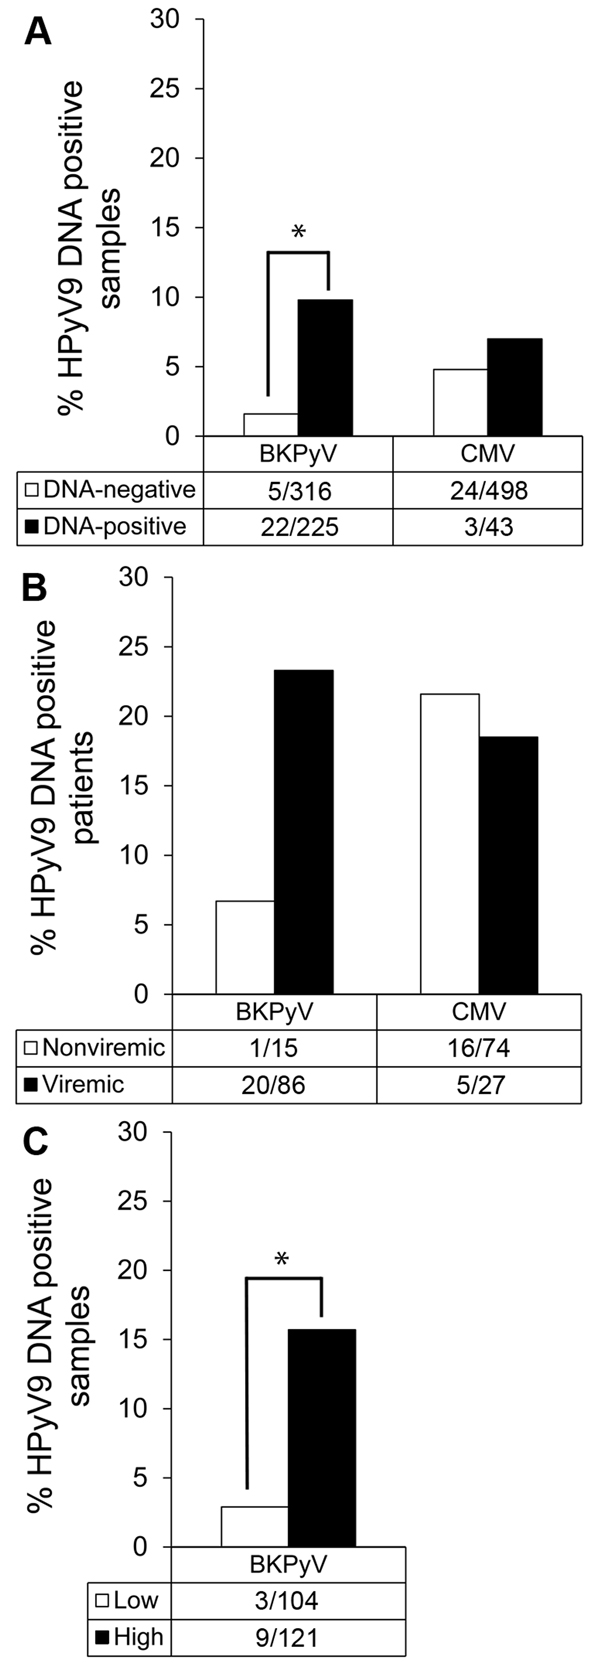 Association between human polyomavirus 9 (HPyV9), BK polyomavirus (BKPyV), and cytomegalovirus (CMV) infection among transplant patients, the Netherlands. A) Percentage of HPyV9 DNA–positive samples among samples that tested negative (white bars) or positive (black bars) for BKPyV and CMV DNA; B) percentage of HPyV9 viremic patients among BKPyV- and CMV-nonviremic (white bars) and viremic (gray bars) patients; C) percentage of HPyV9 DNA–positive samples by measured BKPyV load within the same sam